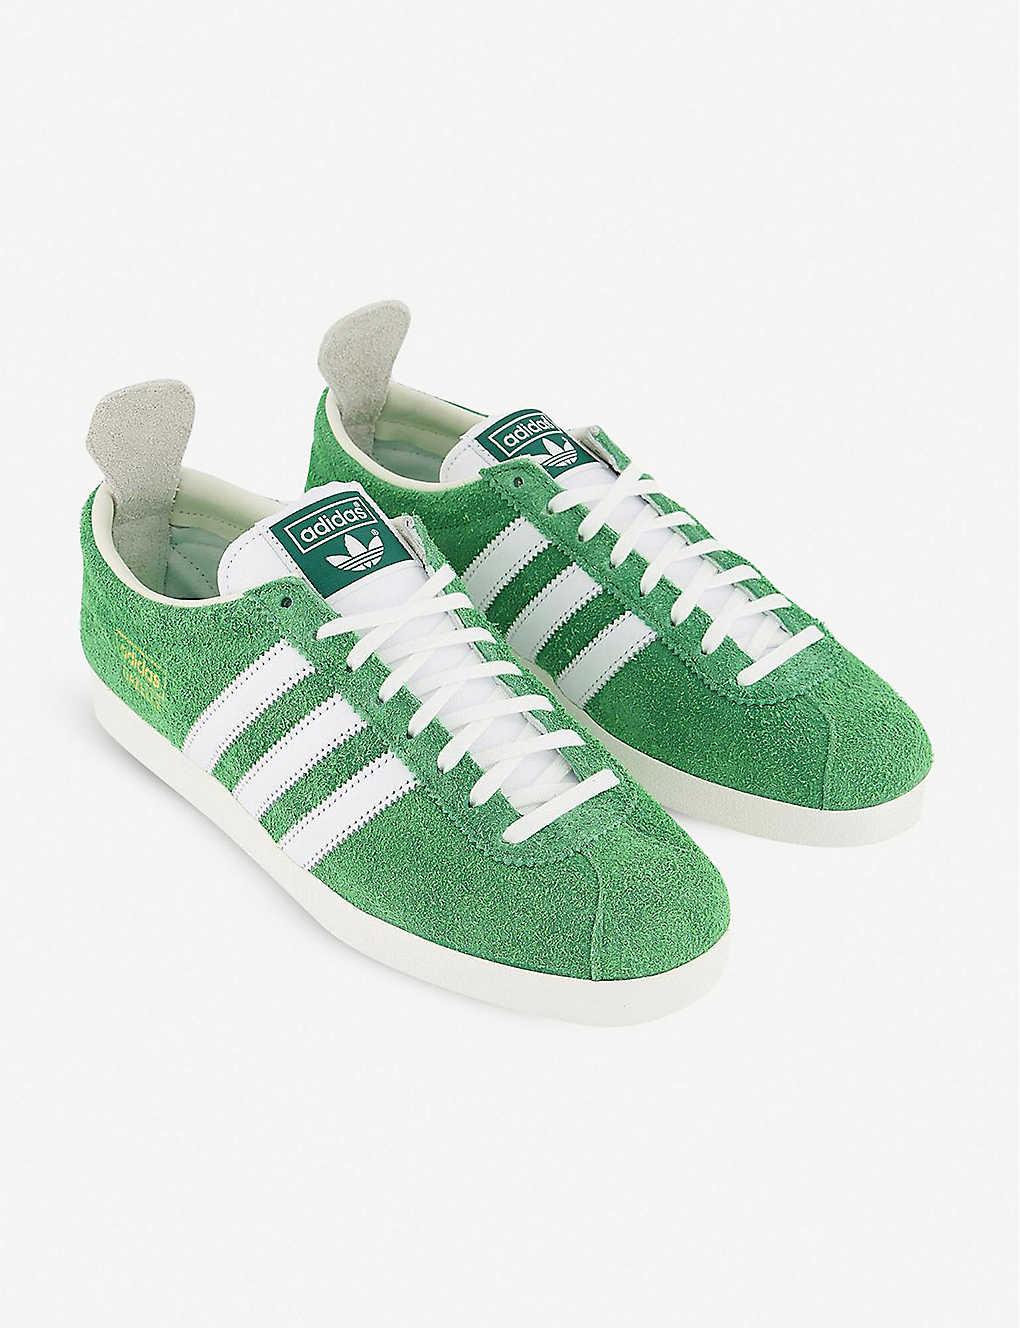 adidas Originals Gazelle Vintage Sneakers in Green & White (Green) for Men  - Save 52% - Lyst